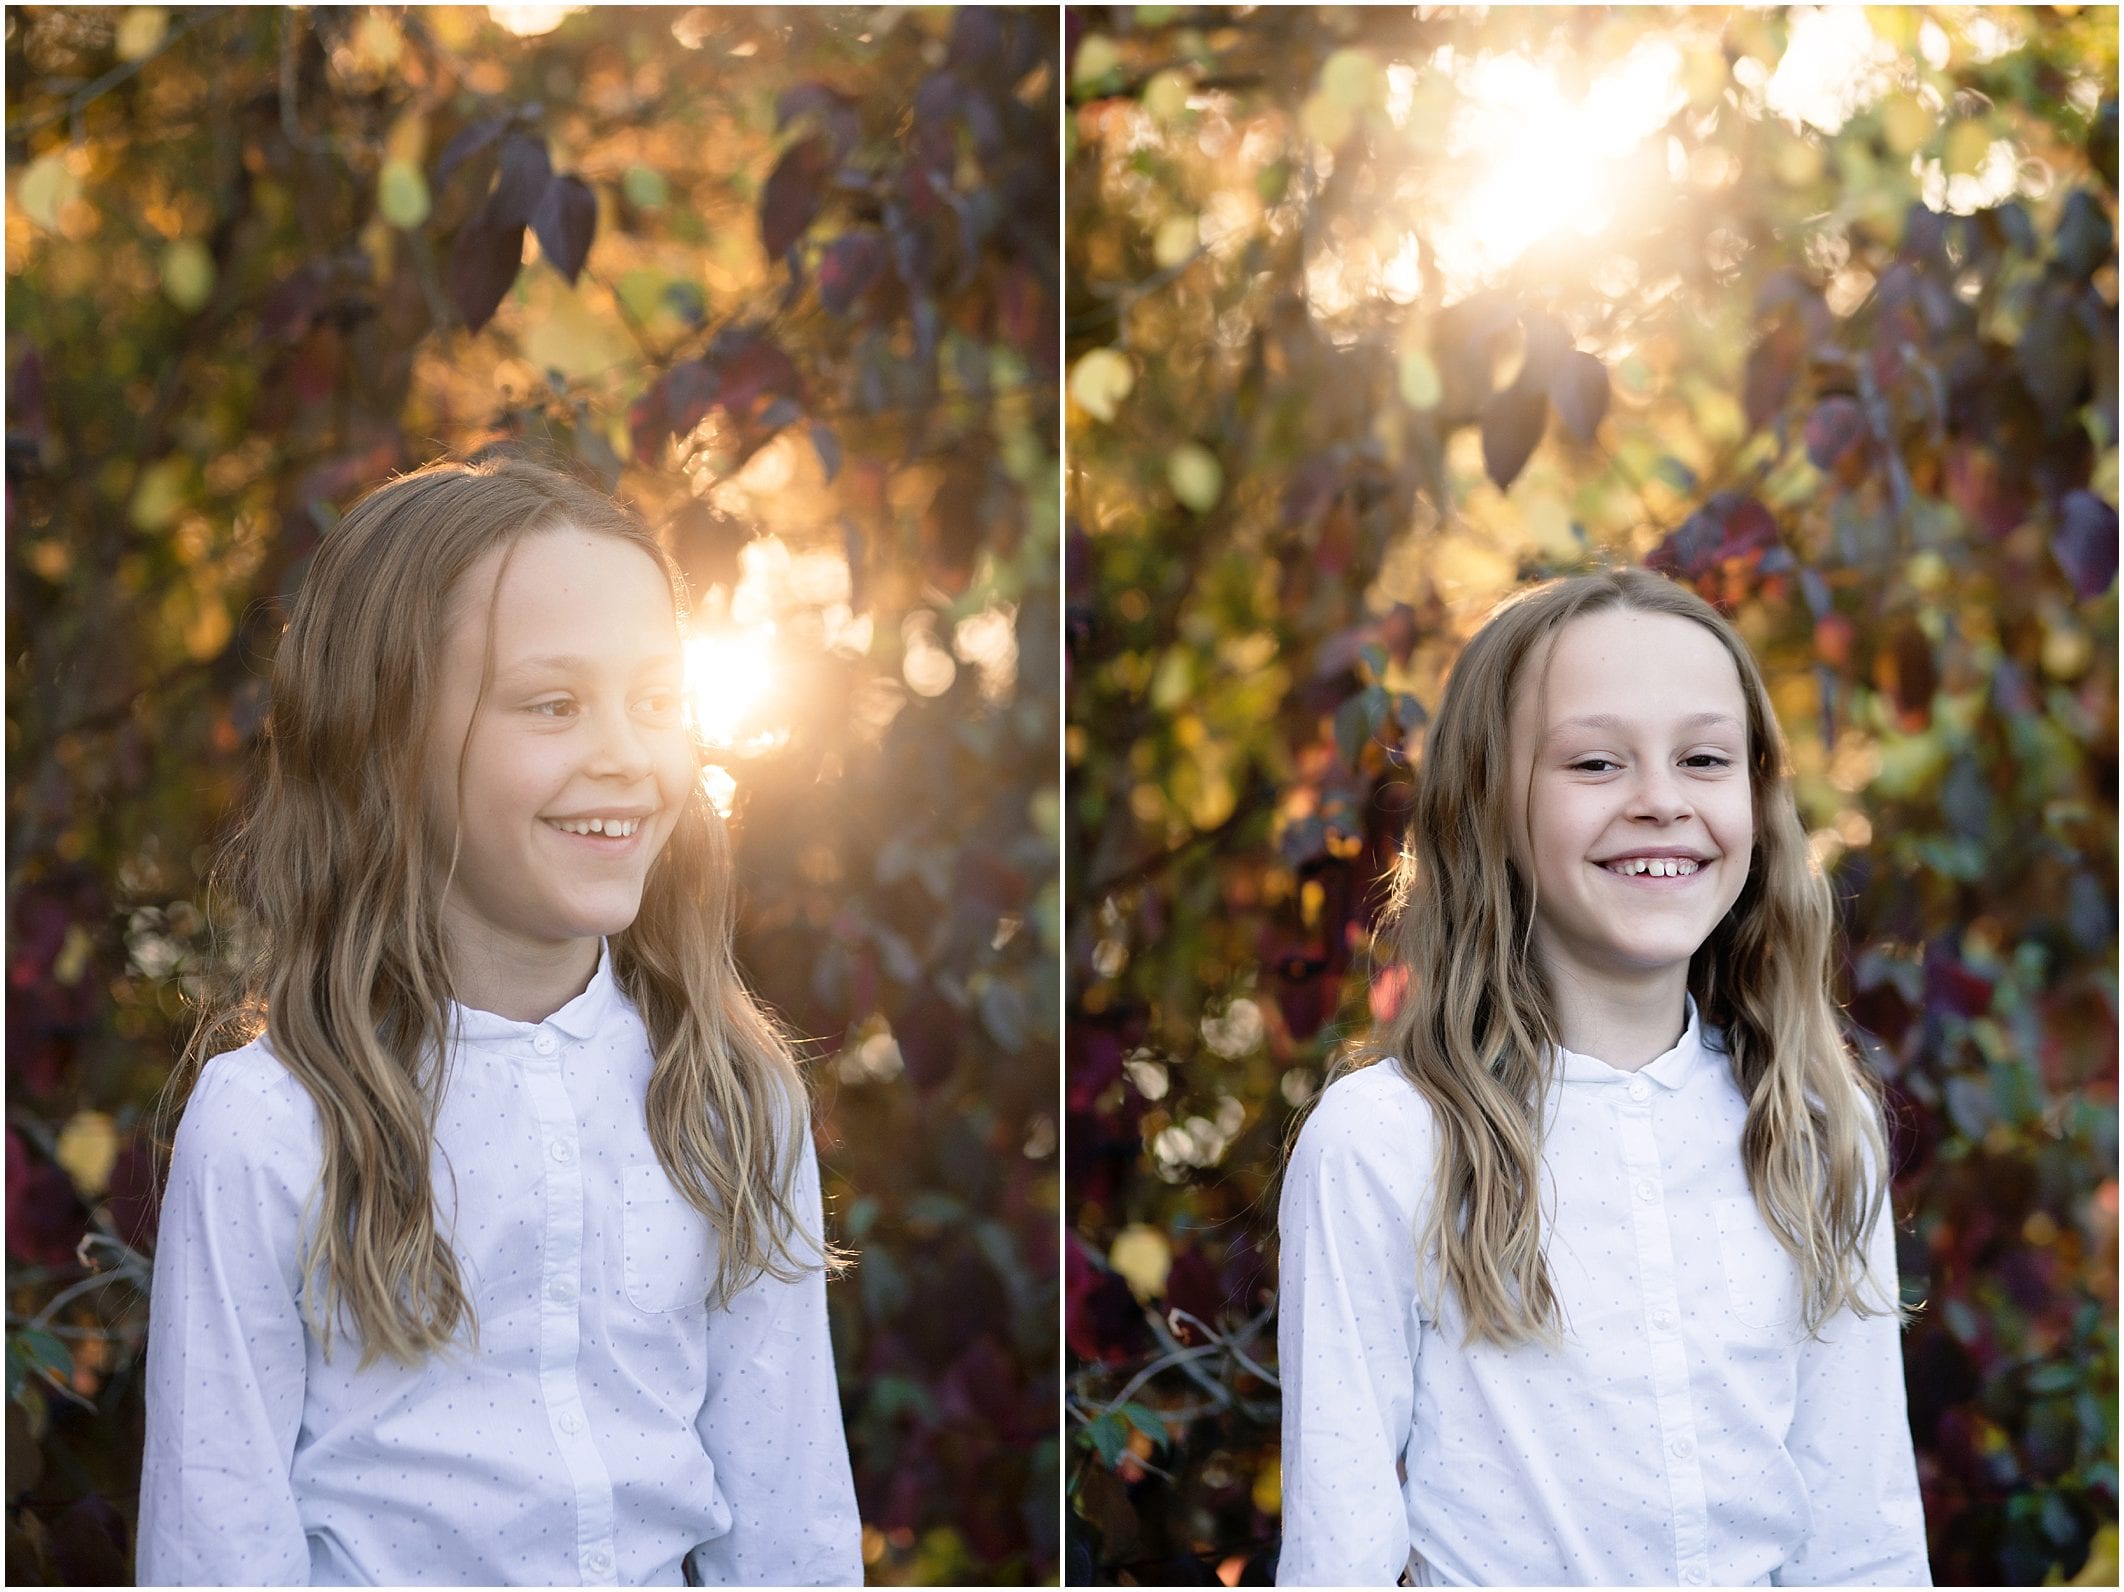 Destination Children's and Family Photographer, Helena Woods, shares her favorite images from her Max-Eyth-See session! Europe